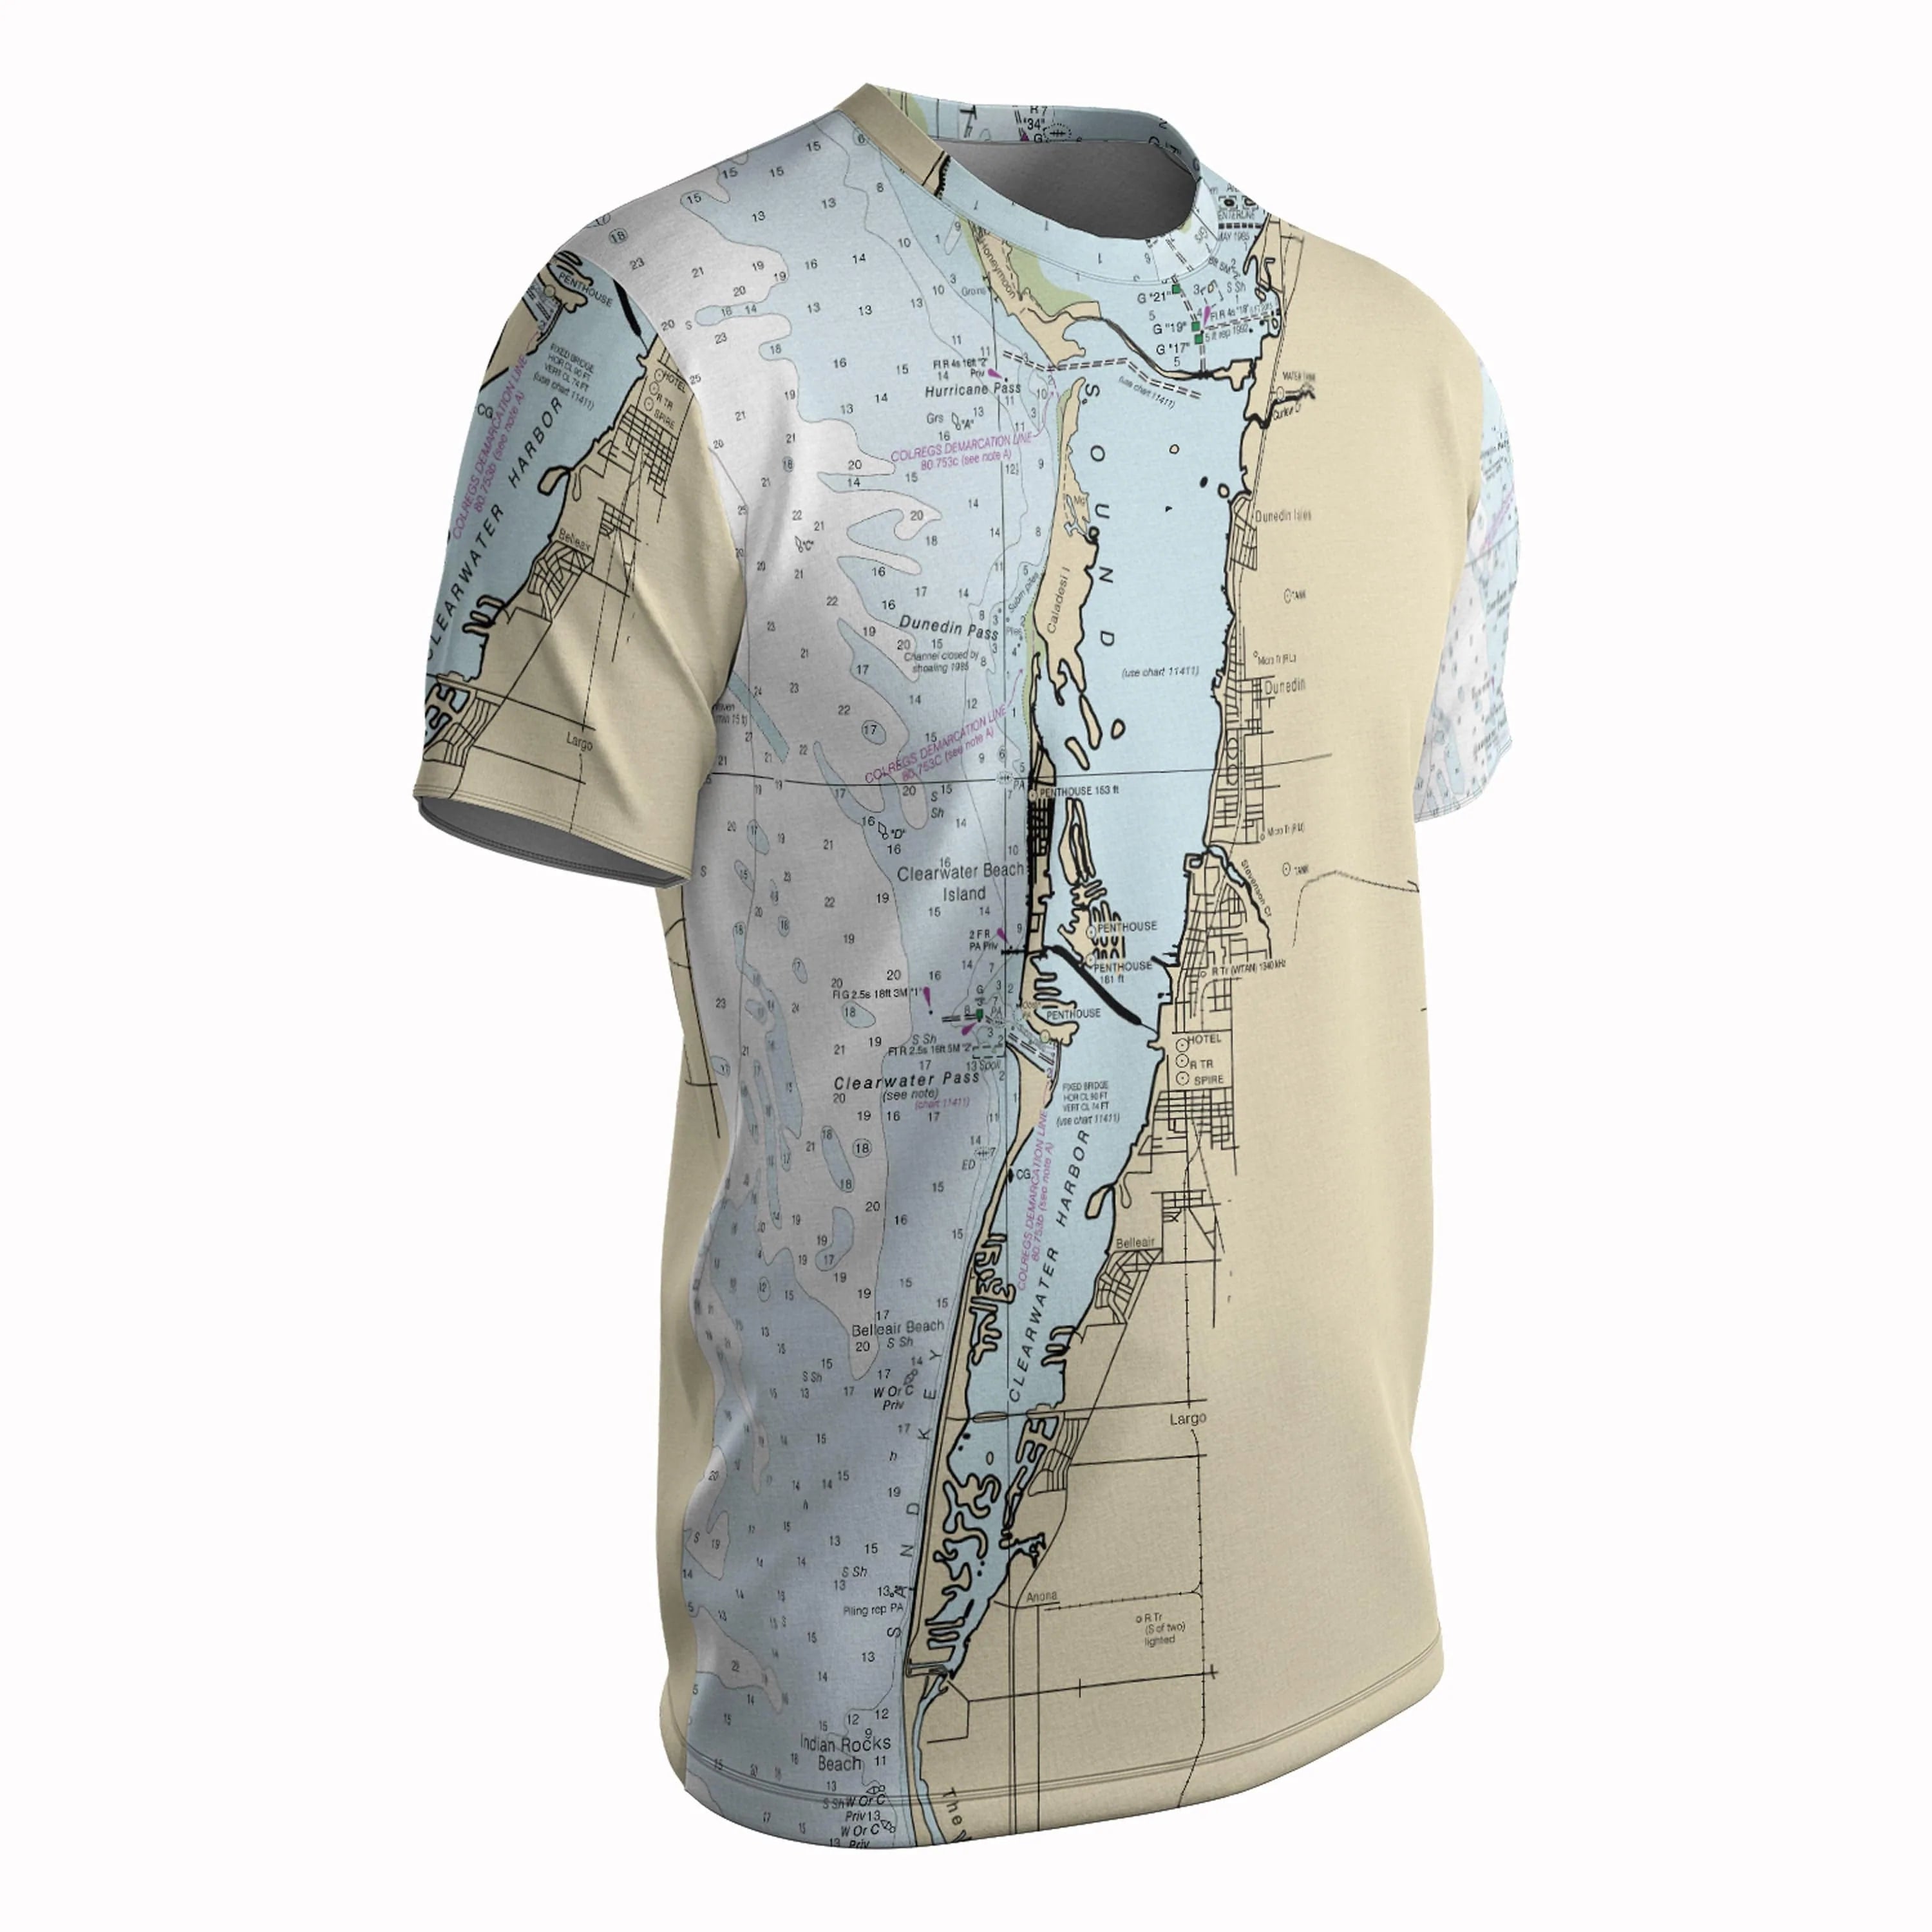 The Clearwater Navigator T Shirt